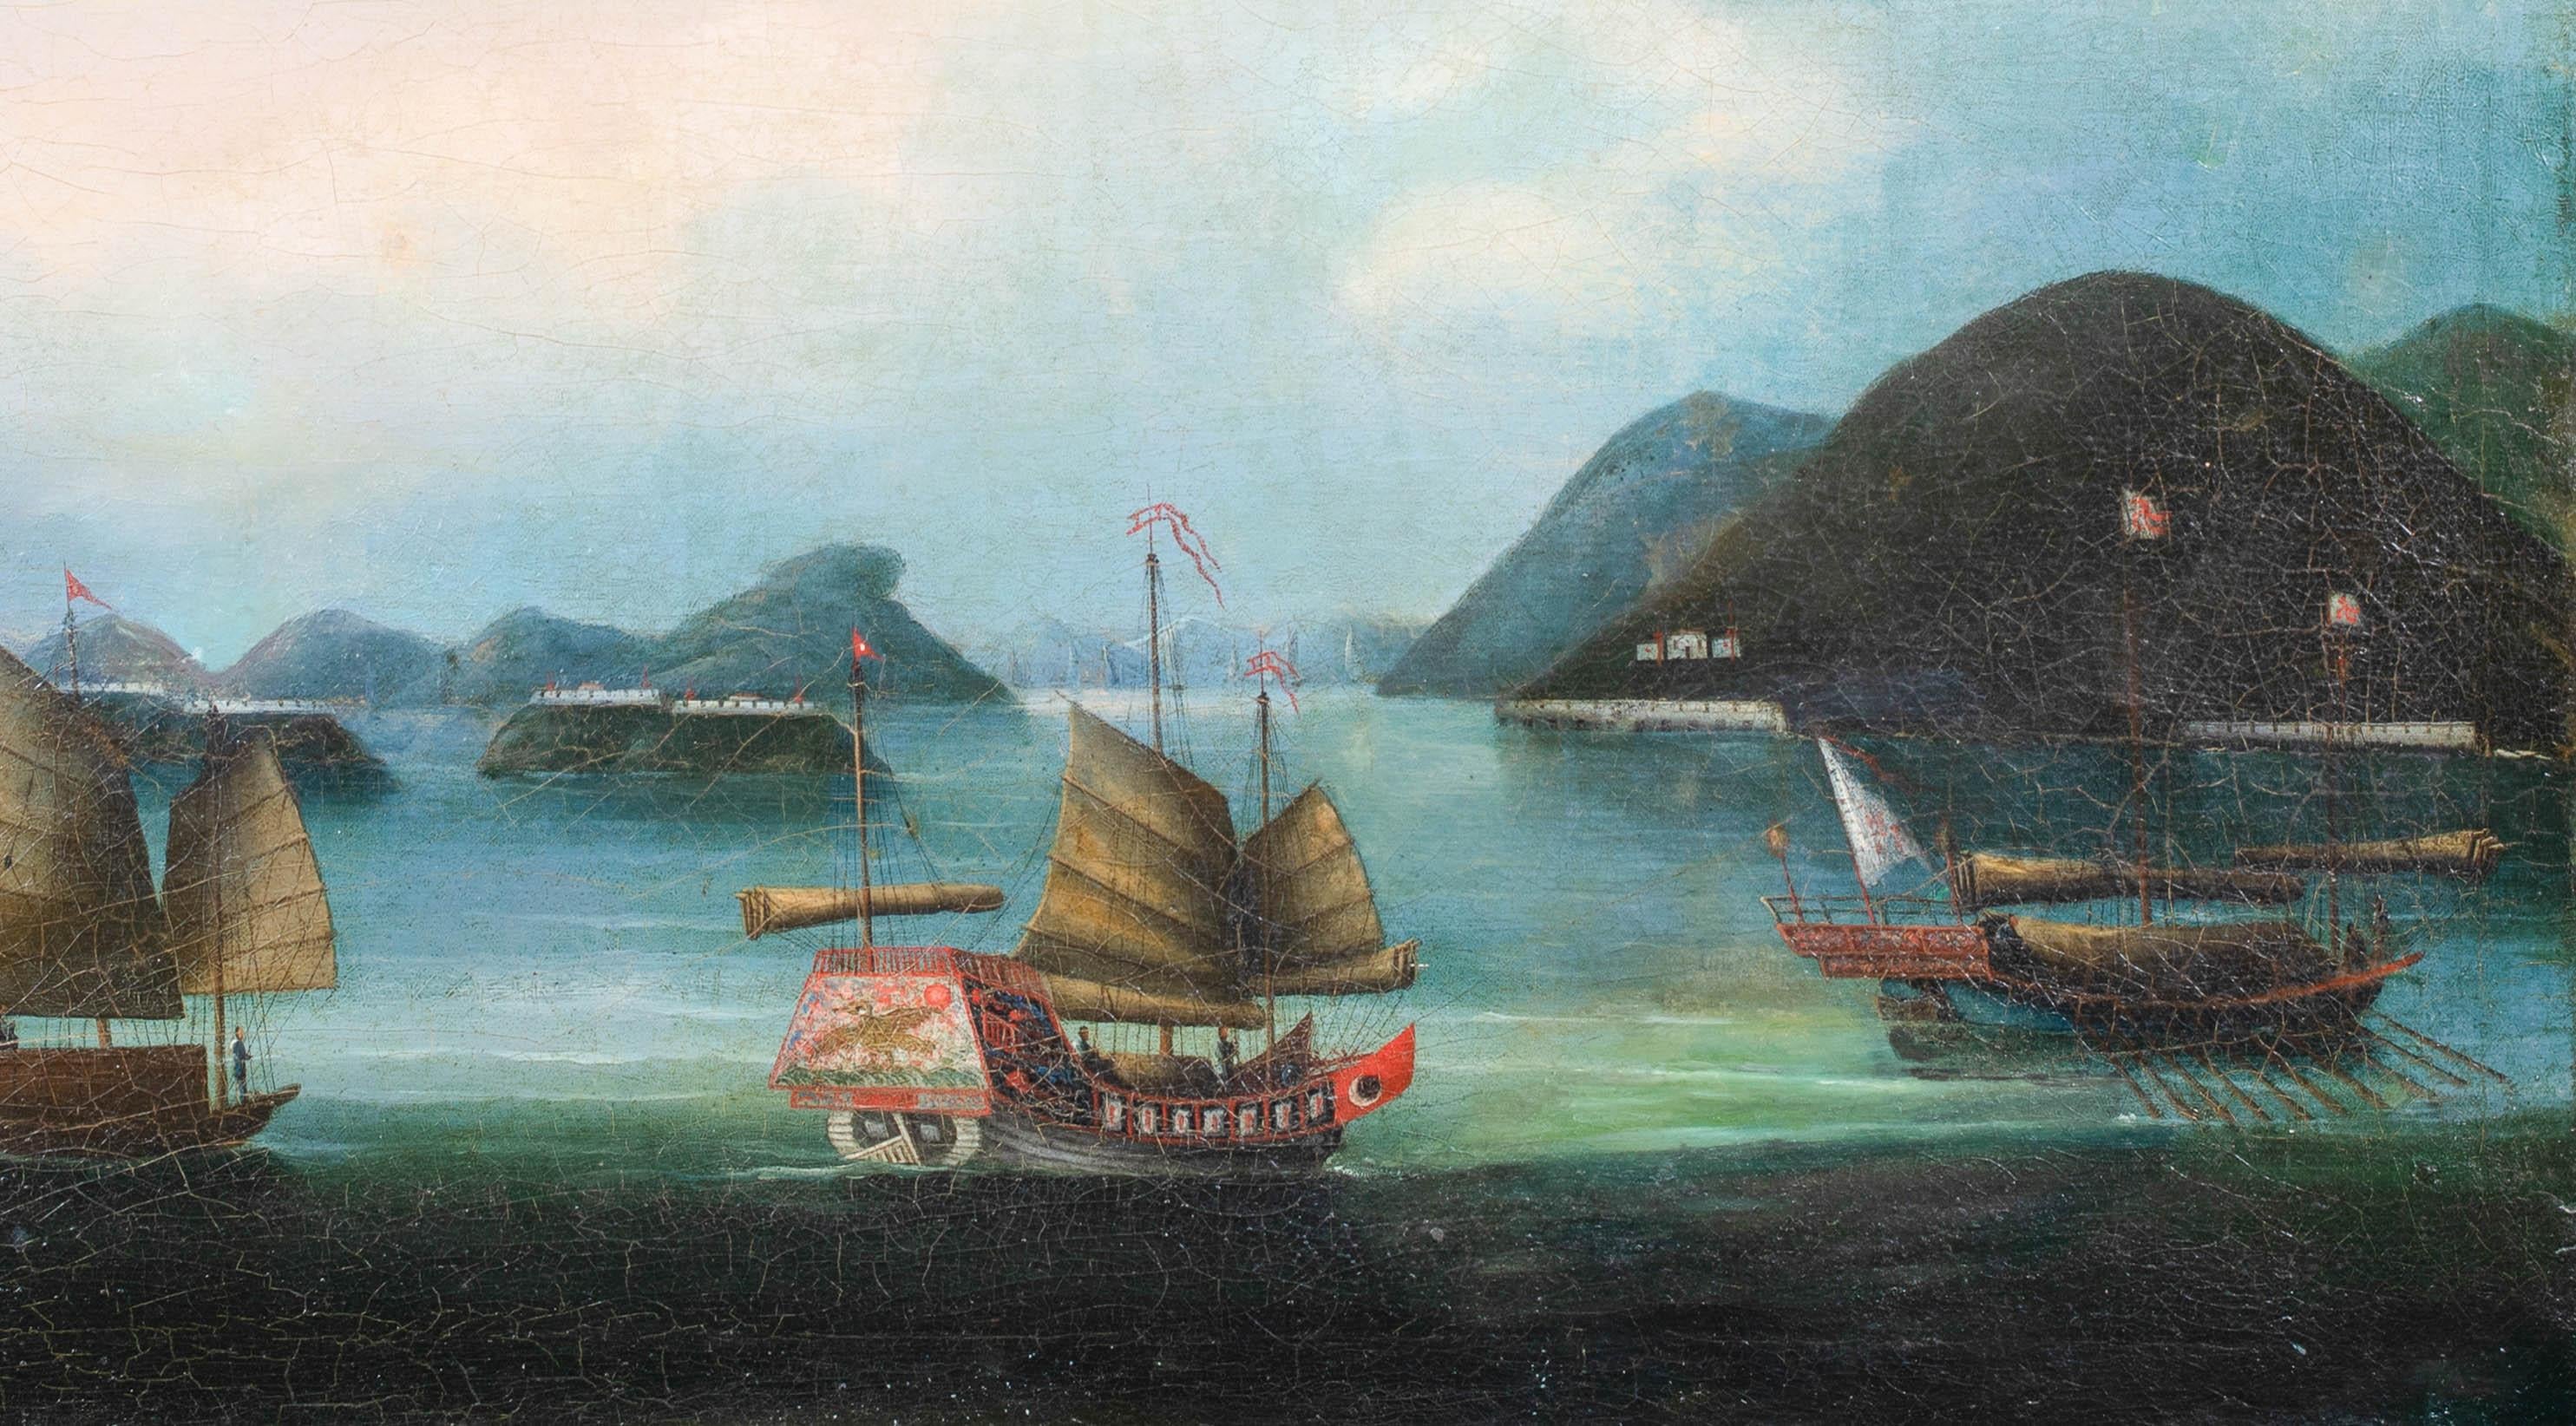 Bocca Tigris, Chinese Export Trade, circa 1850

Qing Dynasty - one of a set of three

Large circa 1850 Qing Dynasty view of Bocca Tigris, oil on canvas. Important early and excellent condition large scale view of the busy trade harbour presented in